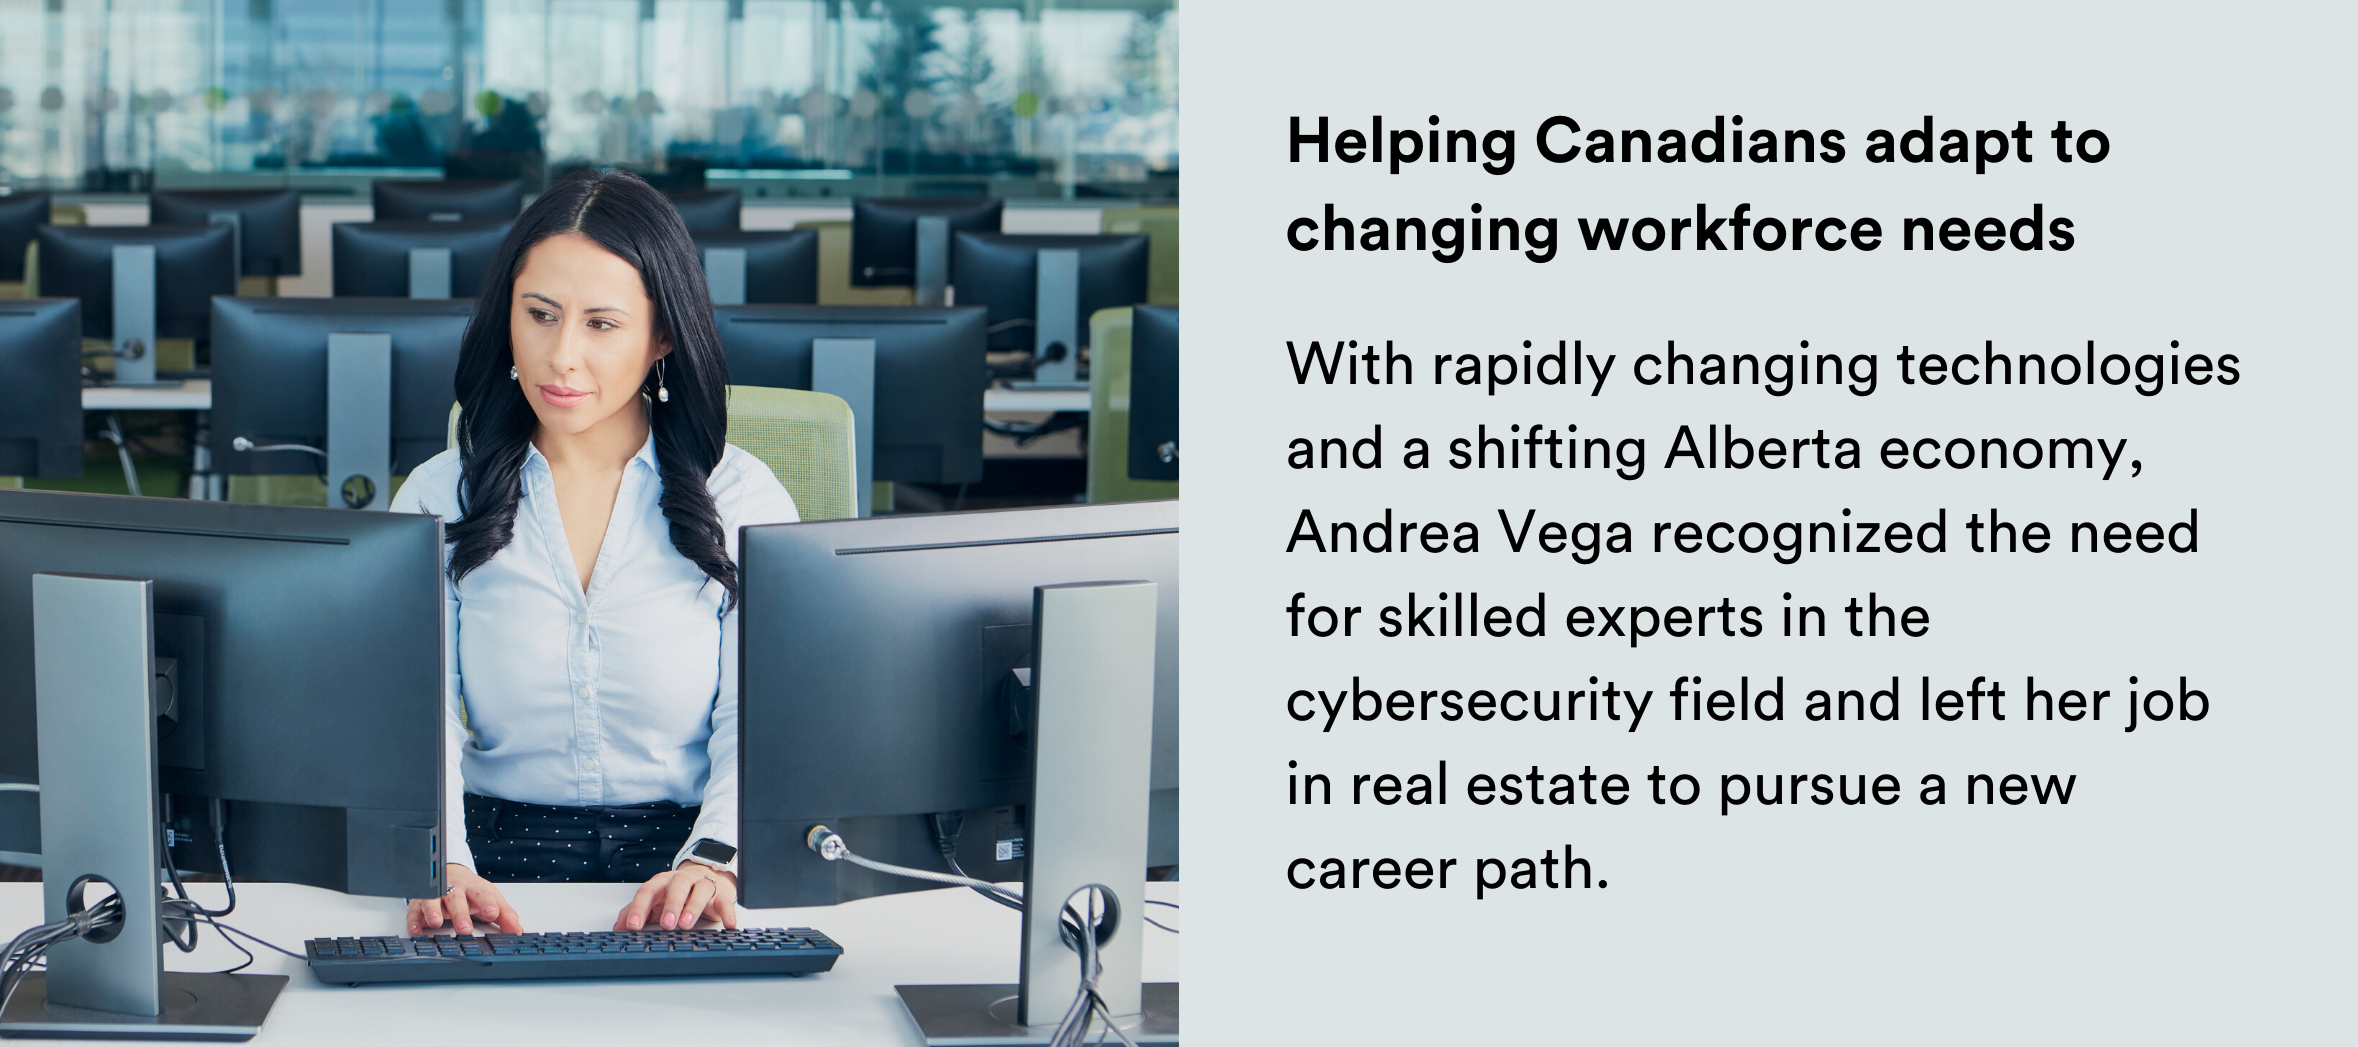 Image: Woman sitting in a computer lab. Text: Helping Canadians adapt to changing workforce needs With rapidly changing technologies and a shifting Alberta economy, Andrea Vega recognized the need for skilled experts in the cybersecurity field and left her job in real estate to pursue a new career path. 